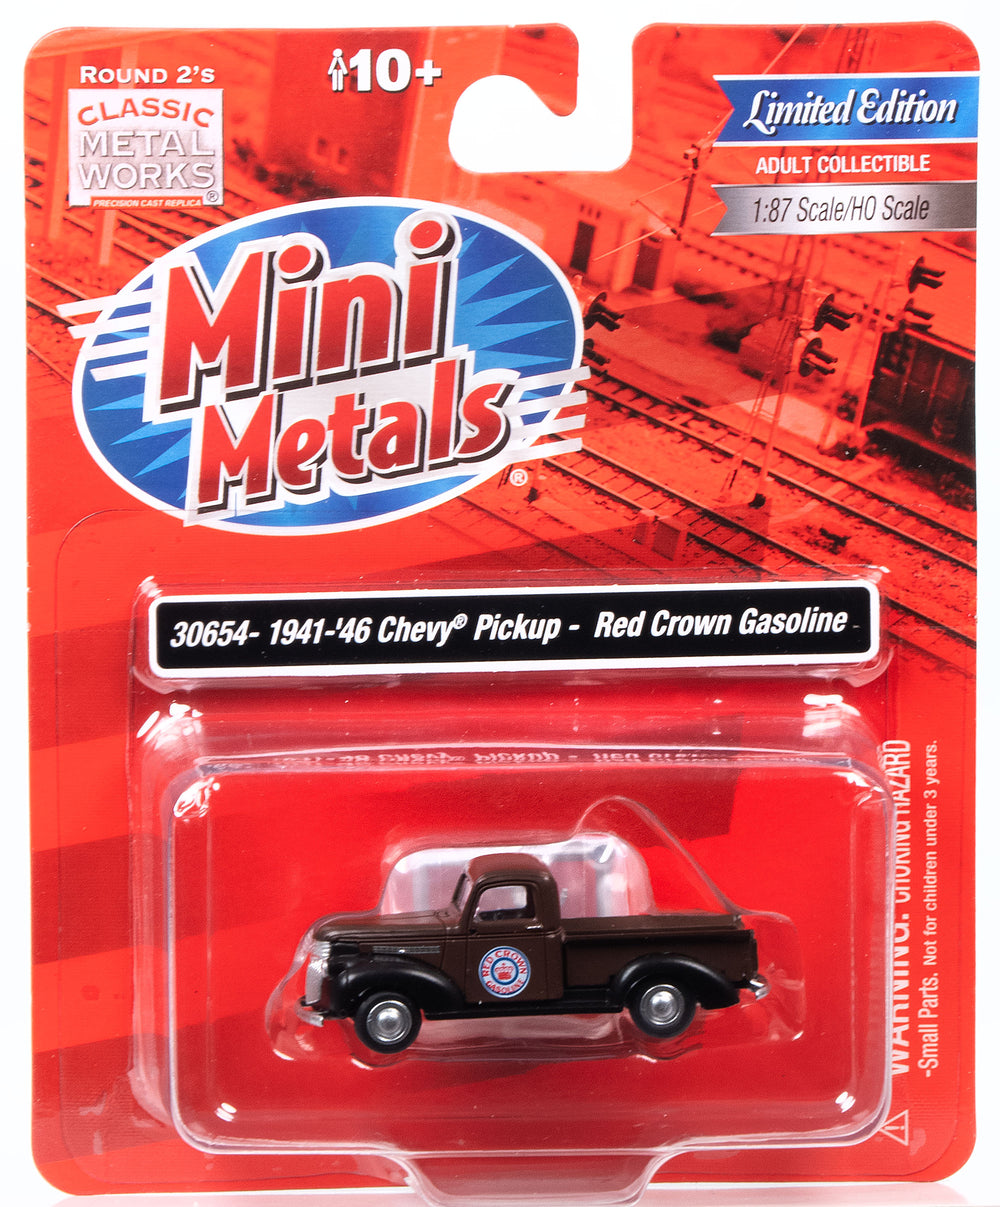 Classic Metal Works 1941-1946 Chevy Pickup (Red Crown Gasoline) 1:87 HO Scale